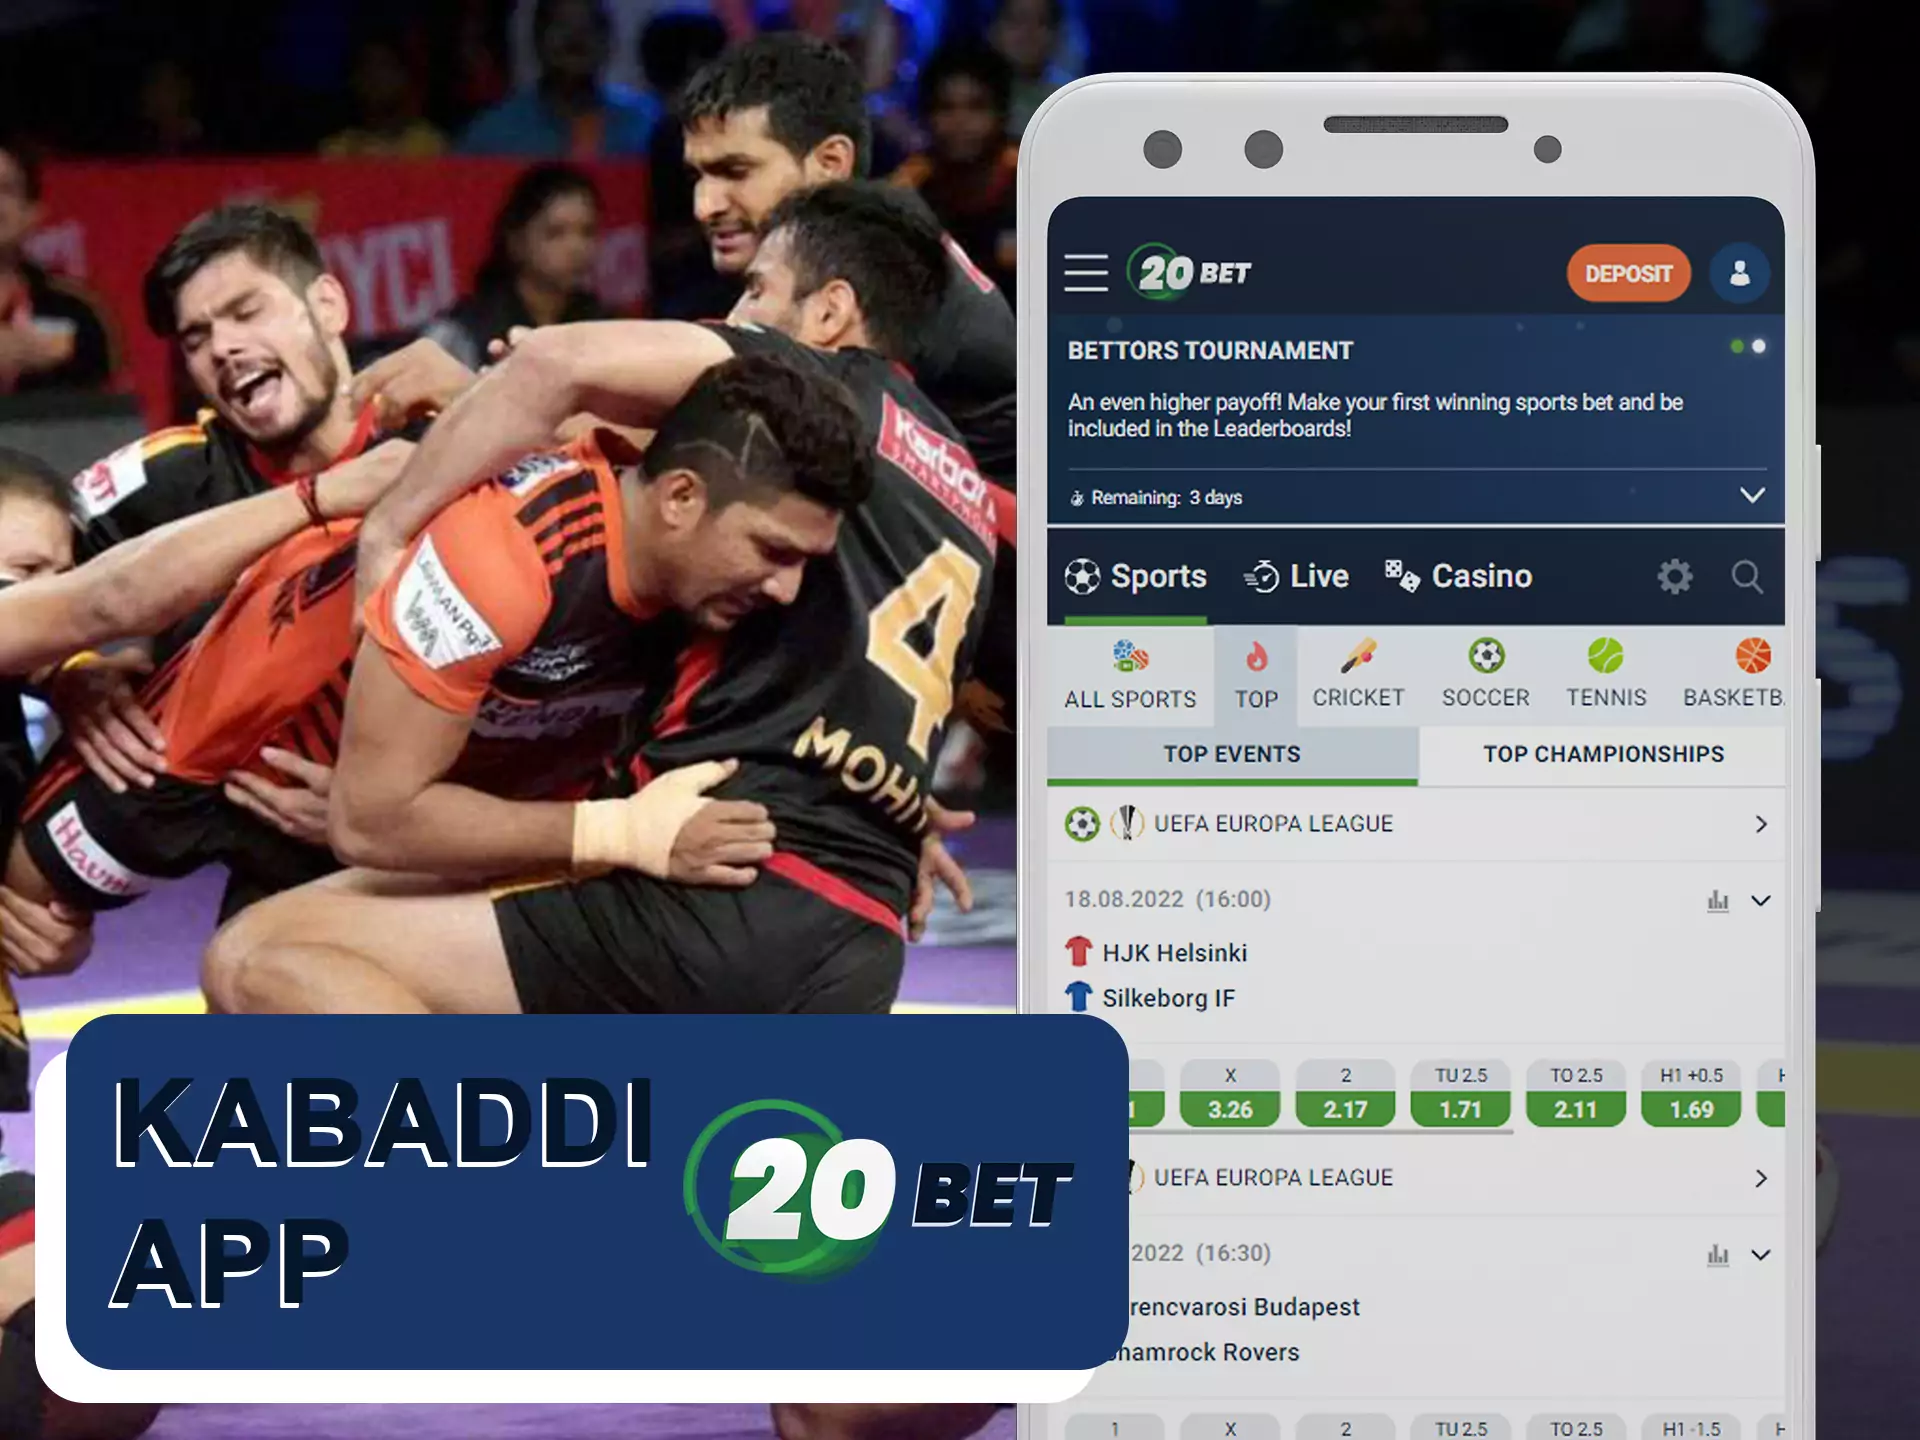 Kabaddi is an interesting sport to watch and bet on.